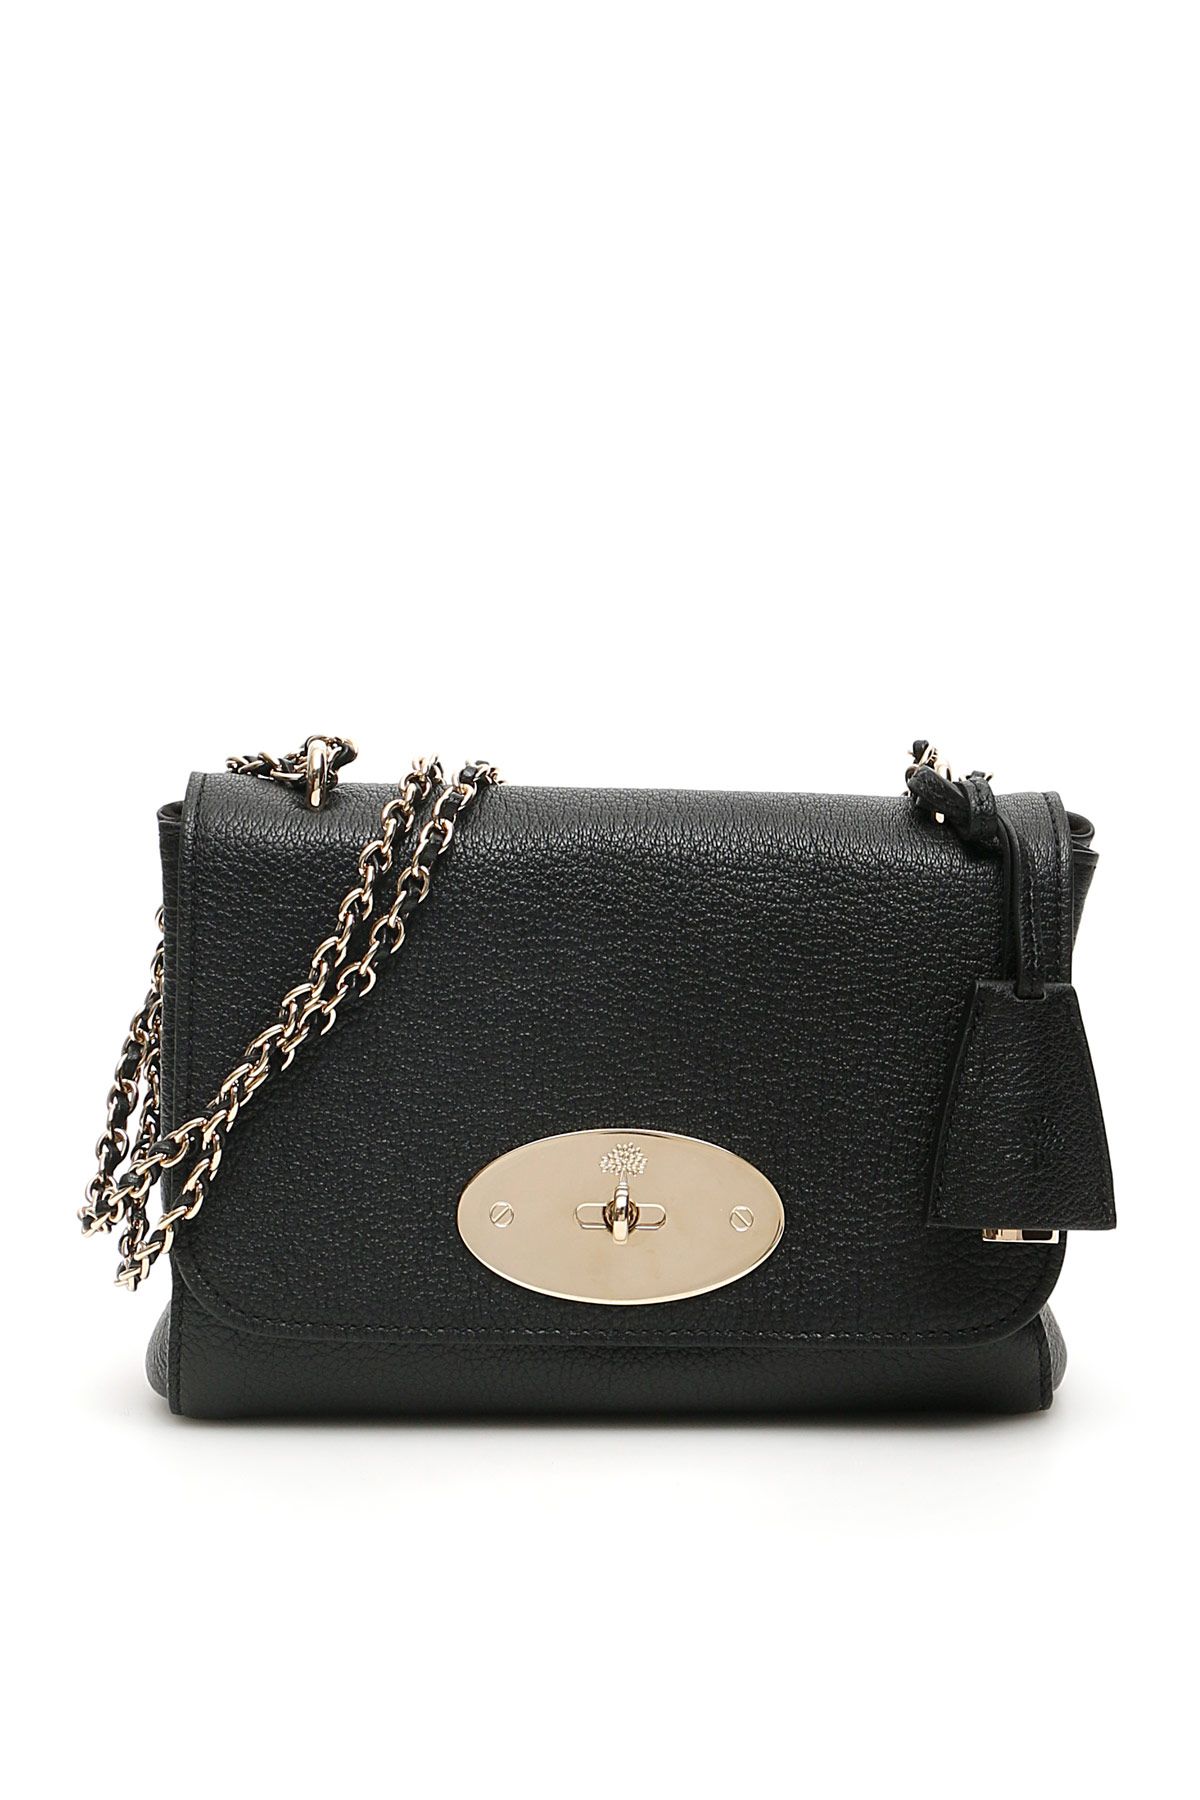 Mulberry MULBERRY lily shoulder bag